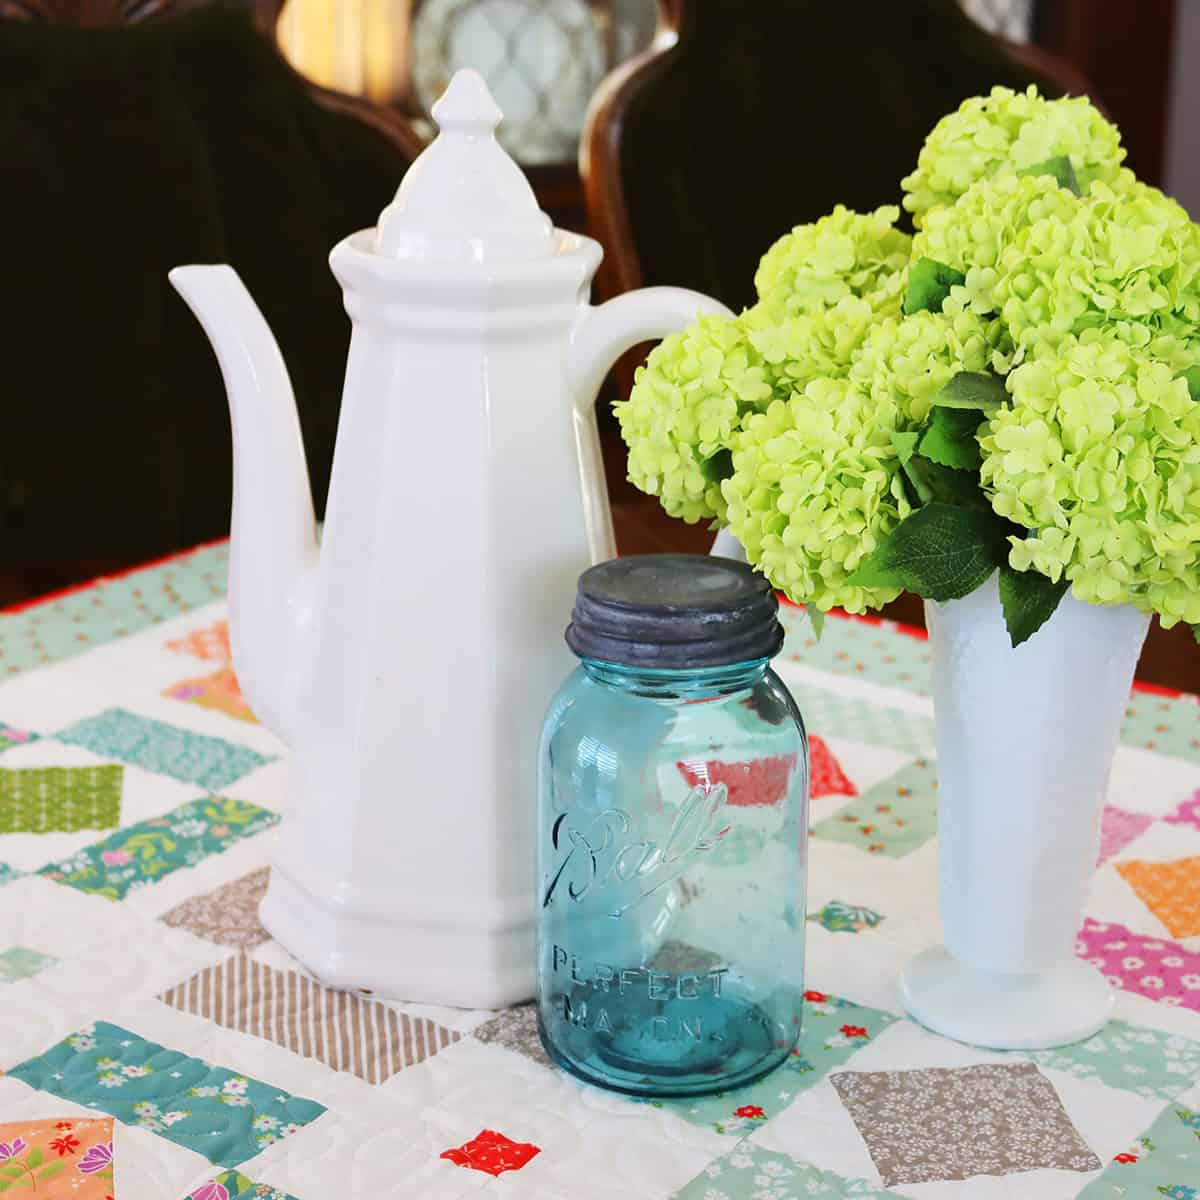 Pitcher, aqua canning jar, and vase with hydrangeas on a quilted table topper.